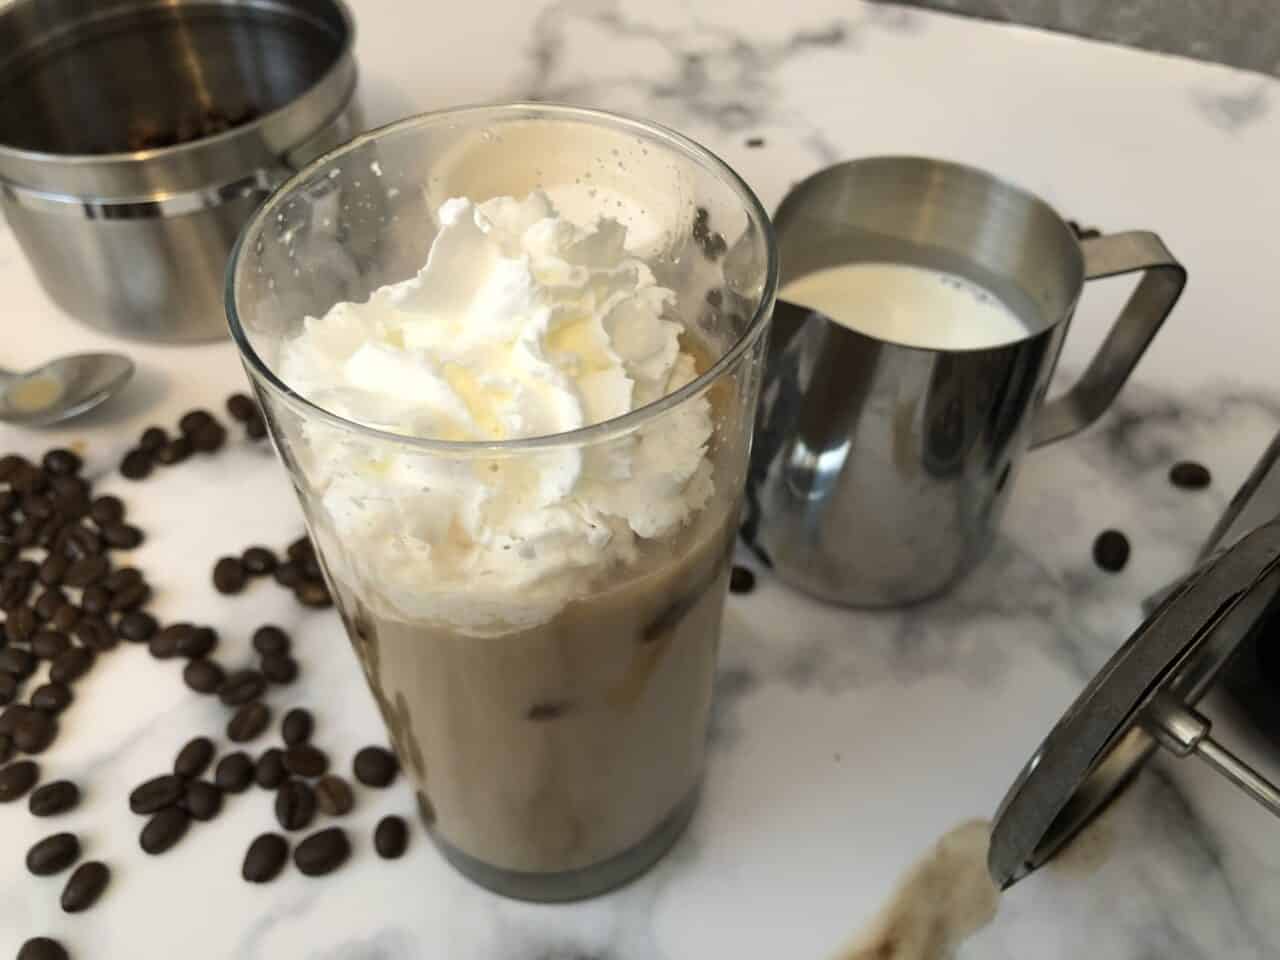 Wiped cream with iced coffee